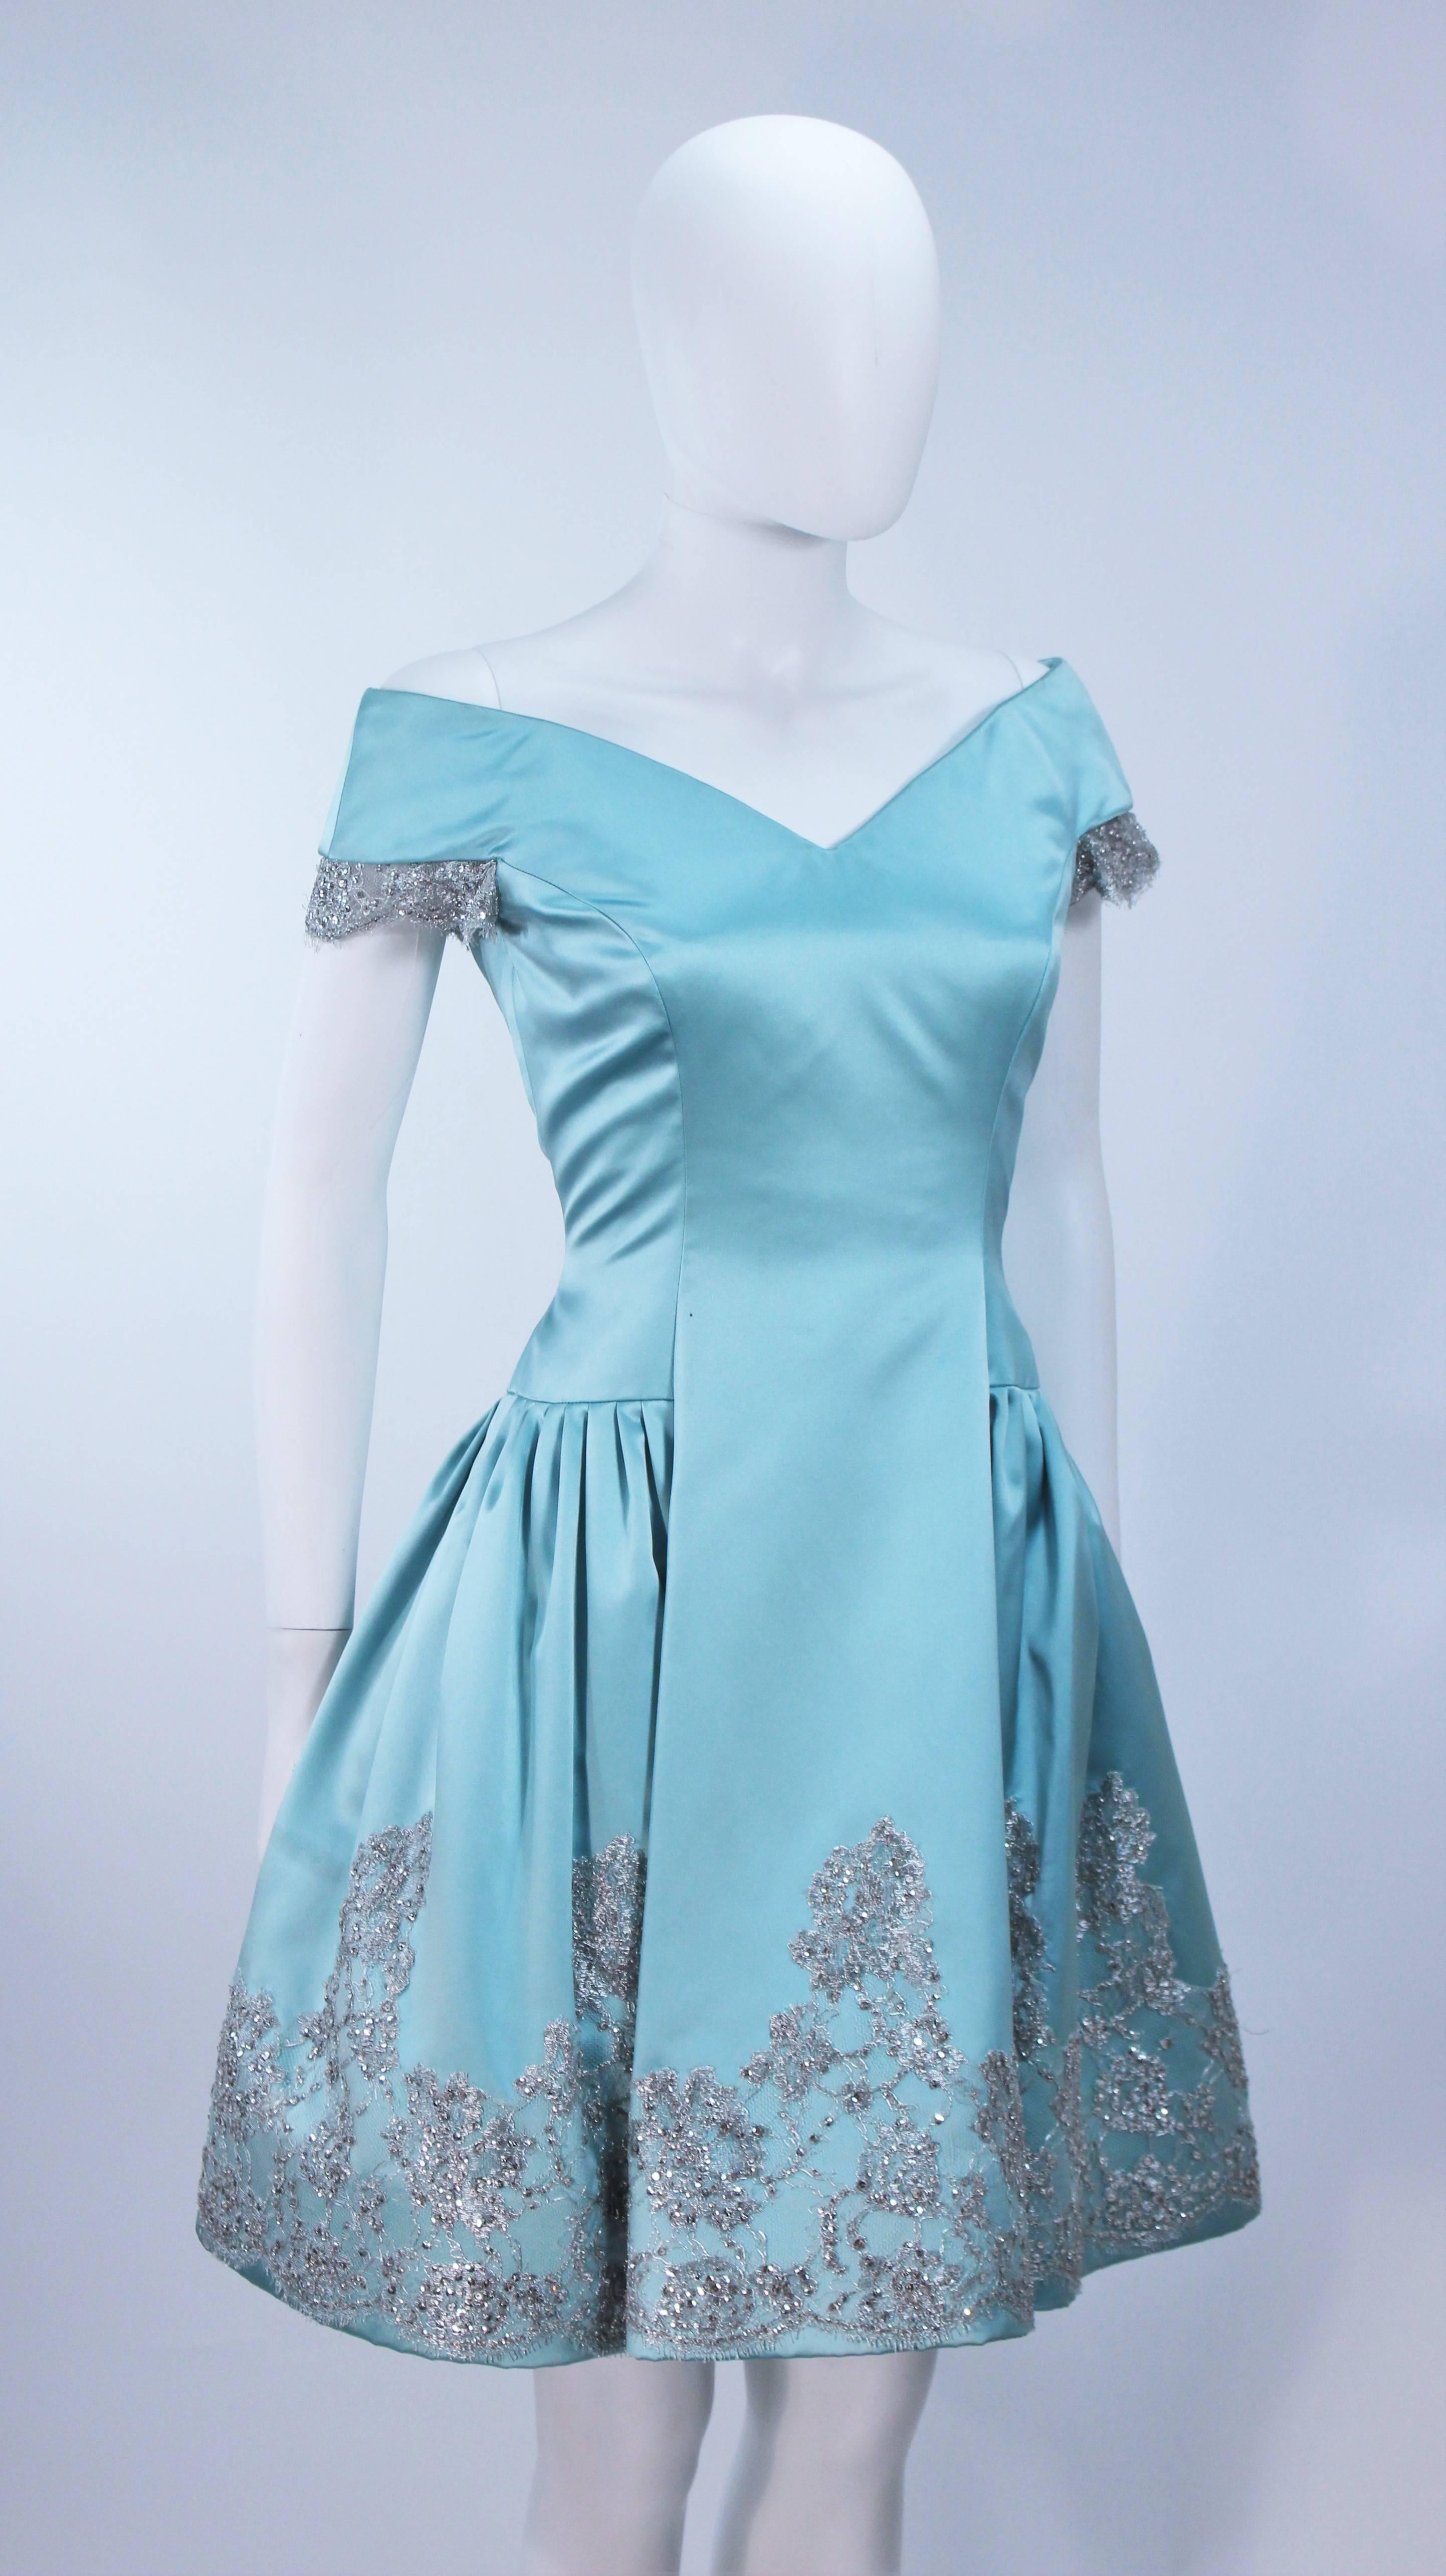 VERA WANG 'Made to Order' Silk Blue Cocktail Dress with Lace Trim Size 6-8 In Excellent Condition For Sale In Los Angeles, CA